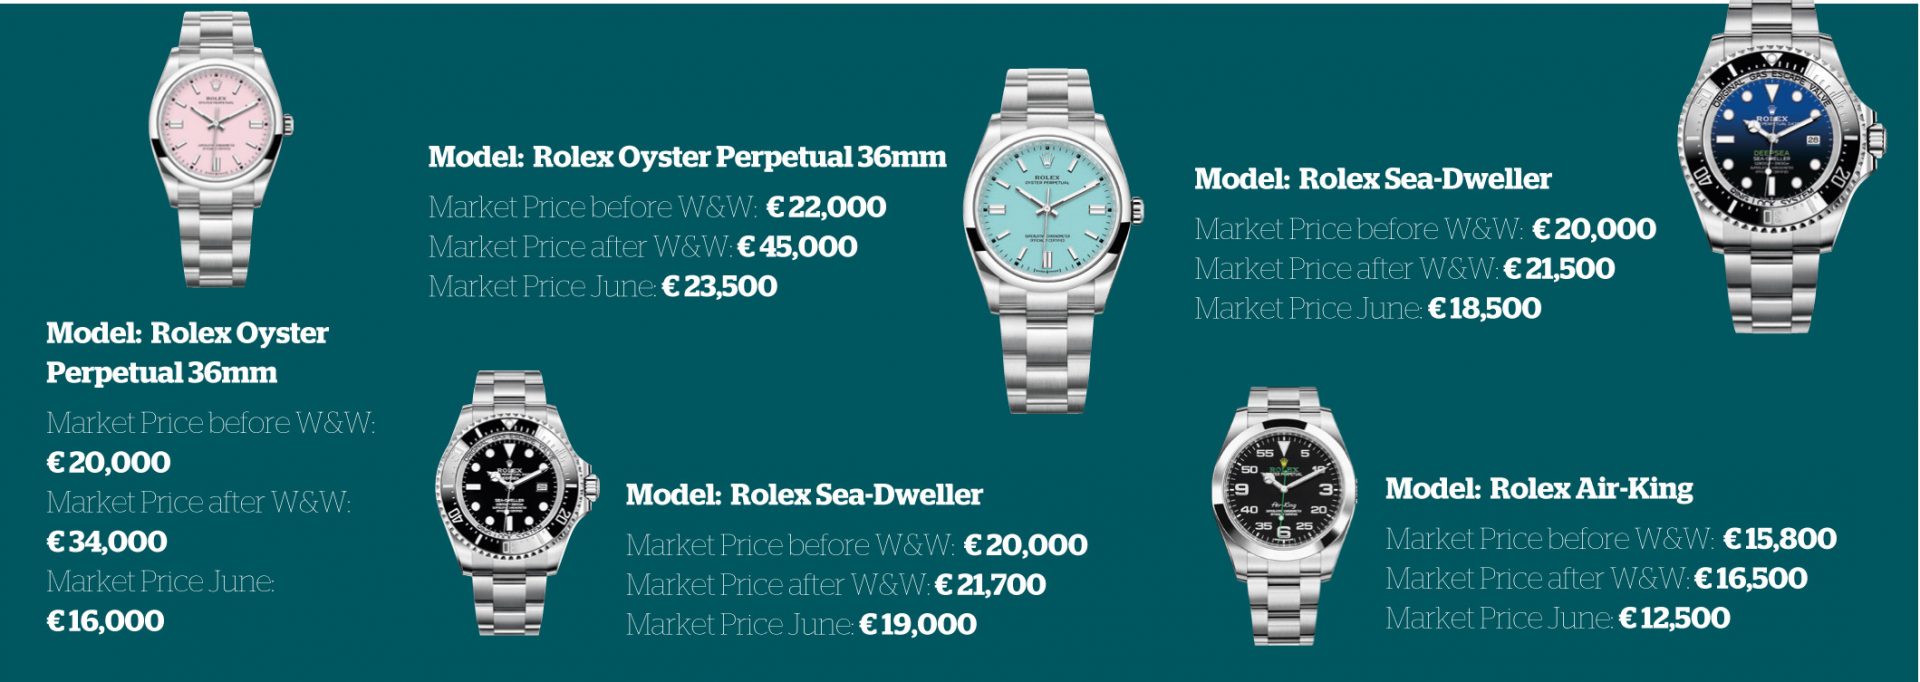 Rolex discontinued watches 2